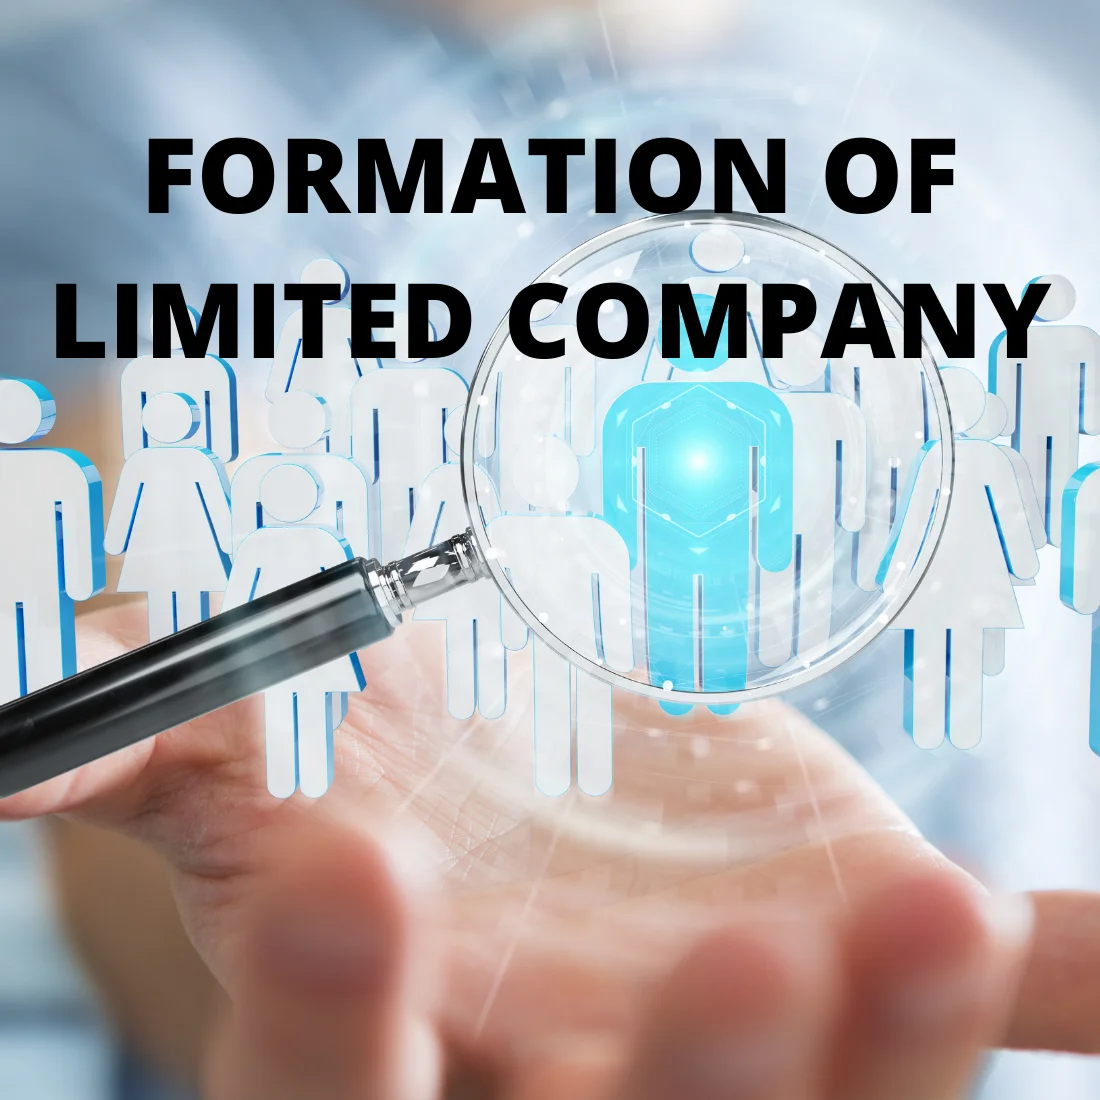 Formation of Limited Company